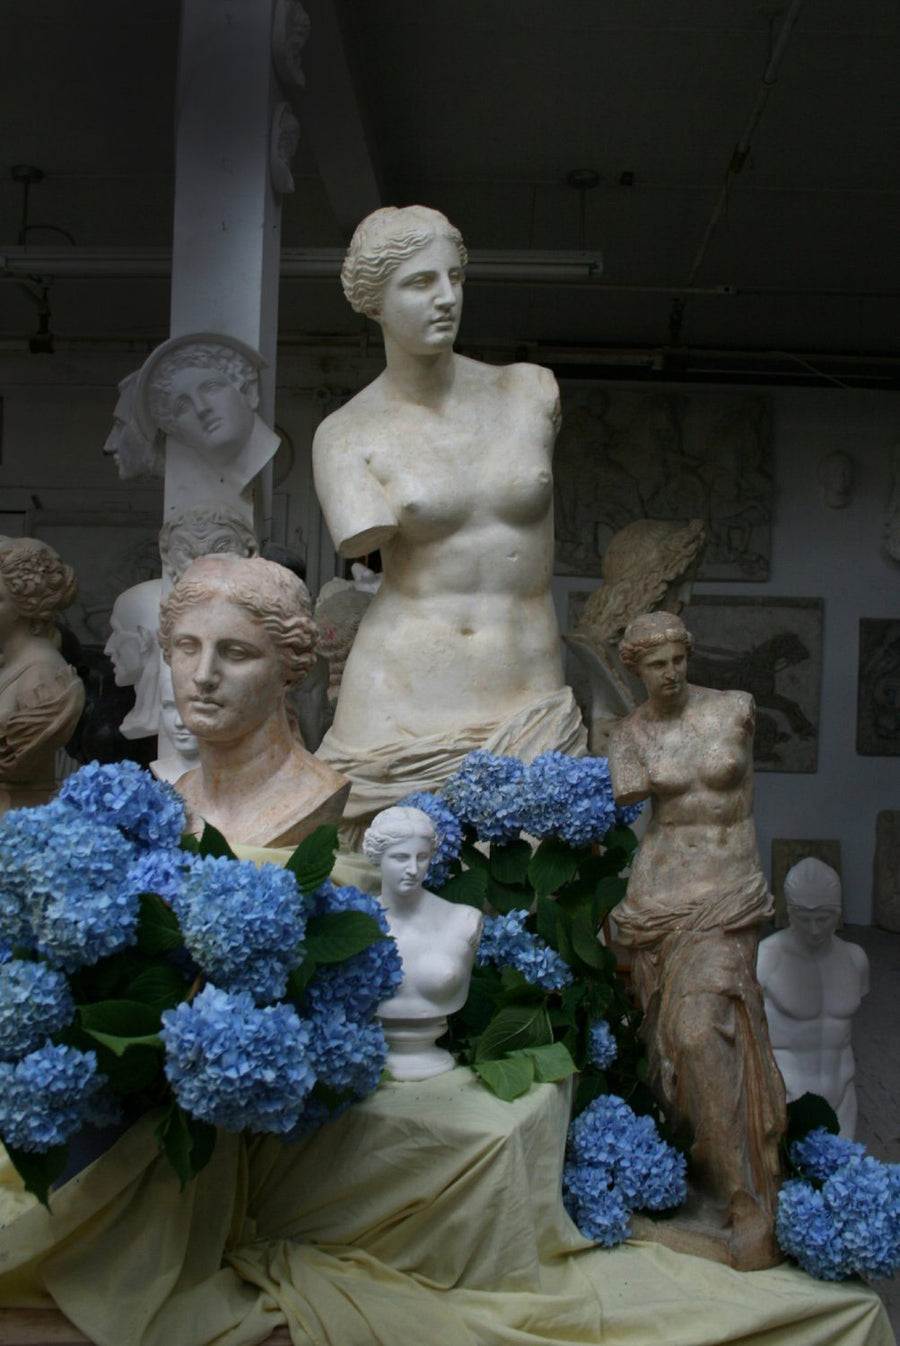 photo with two plaster cast busts and two plaster cast standing figures of Venus with yellow sheet and blue hydrangeas